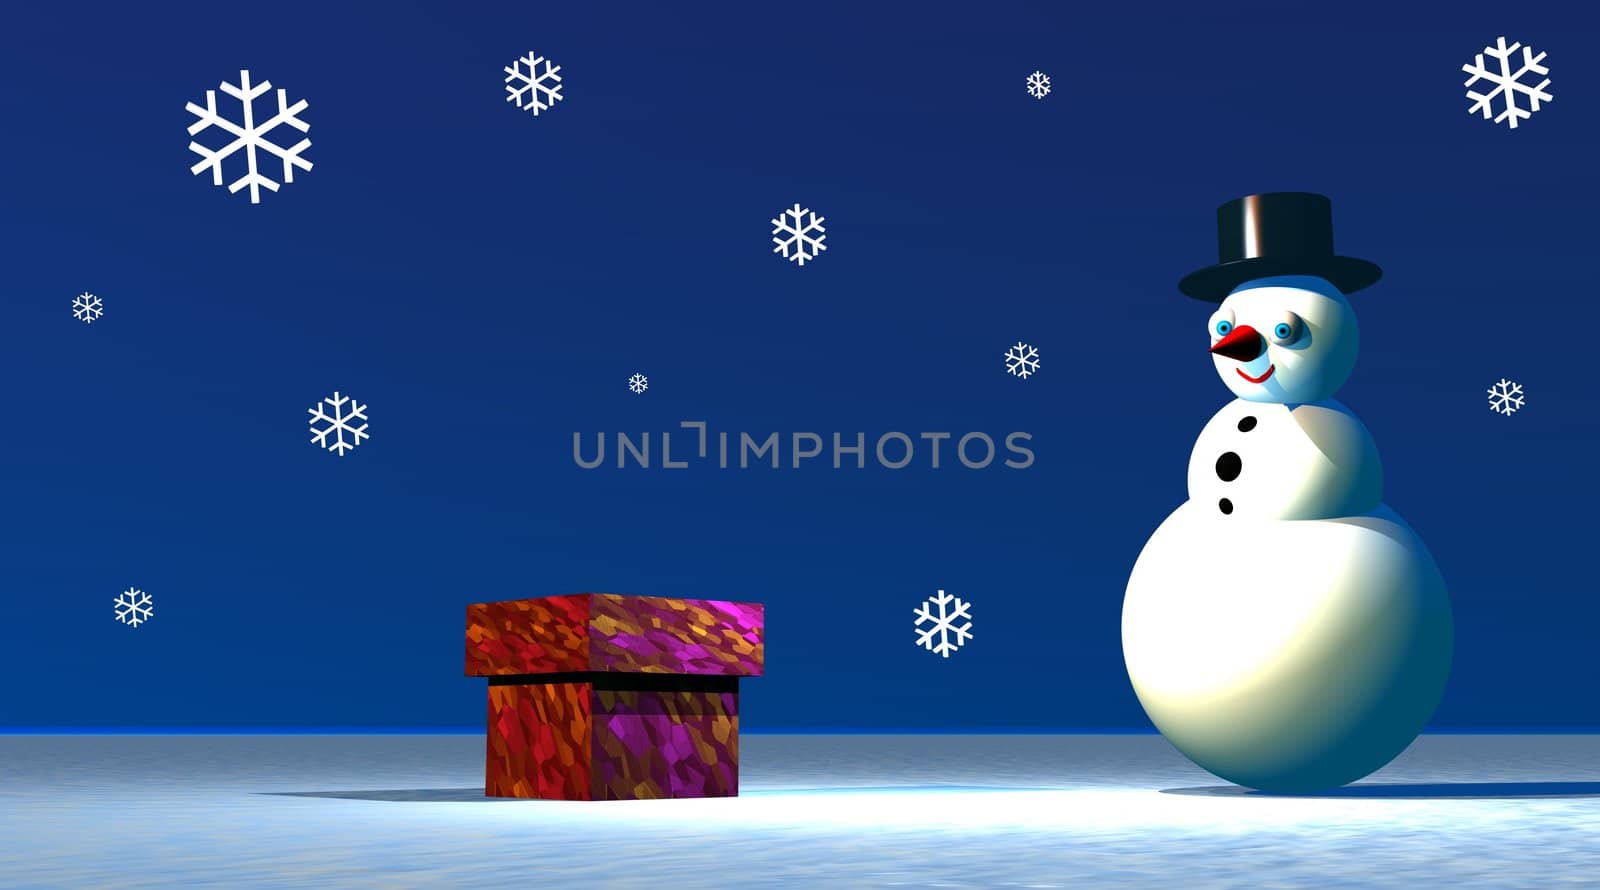 Snowman wearing a black hat smiling looking at a gift box by snowing night